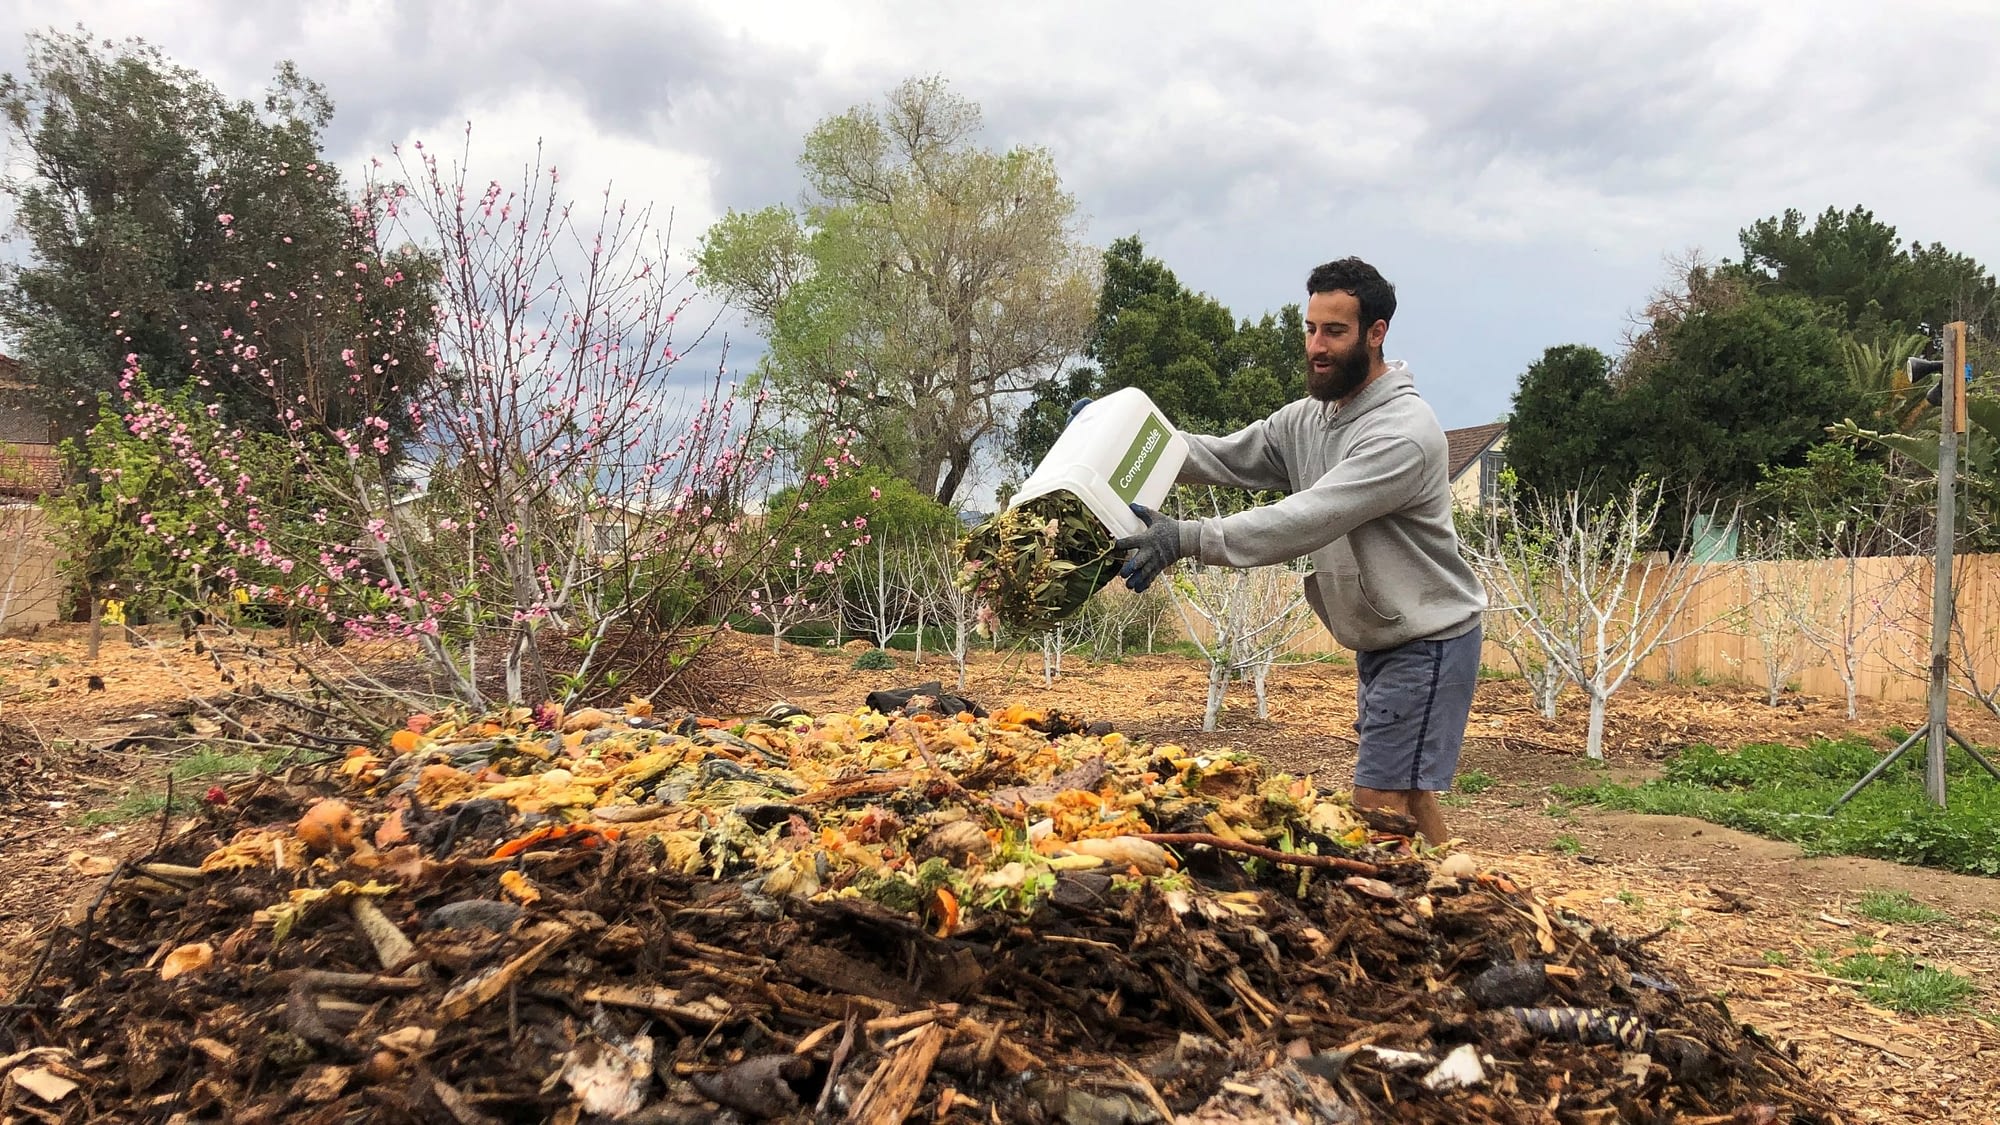 Image: Person throwing food waste onto a compost pile